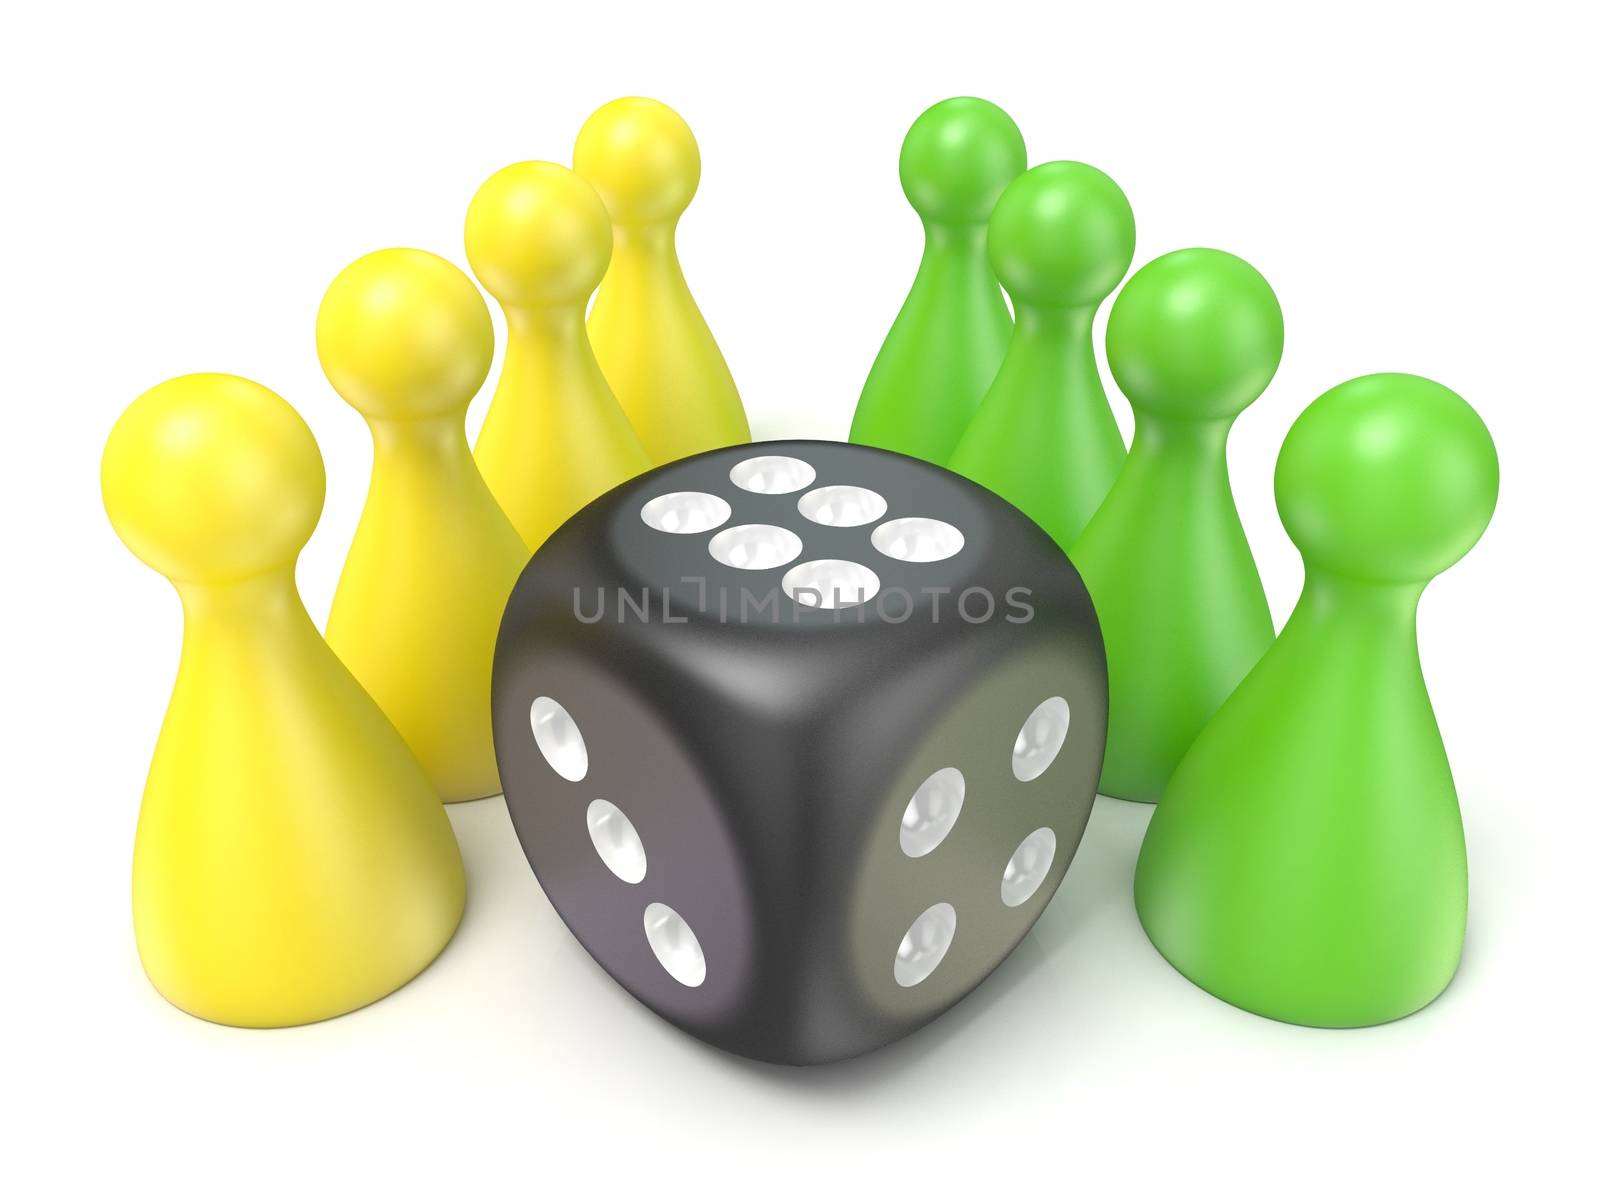 Conceptual game pawns and black dice. 3D by djmilic